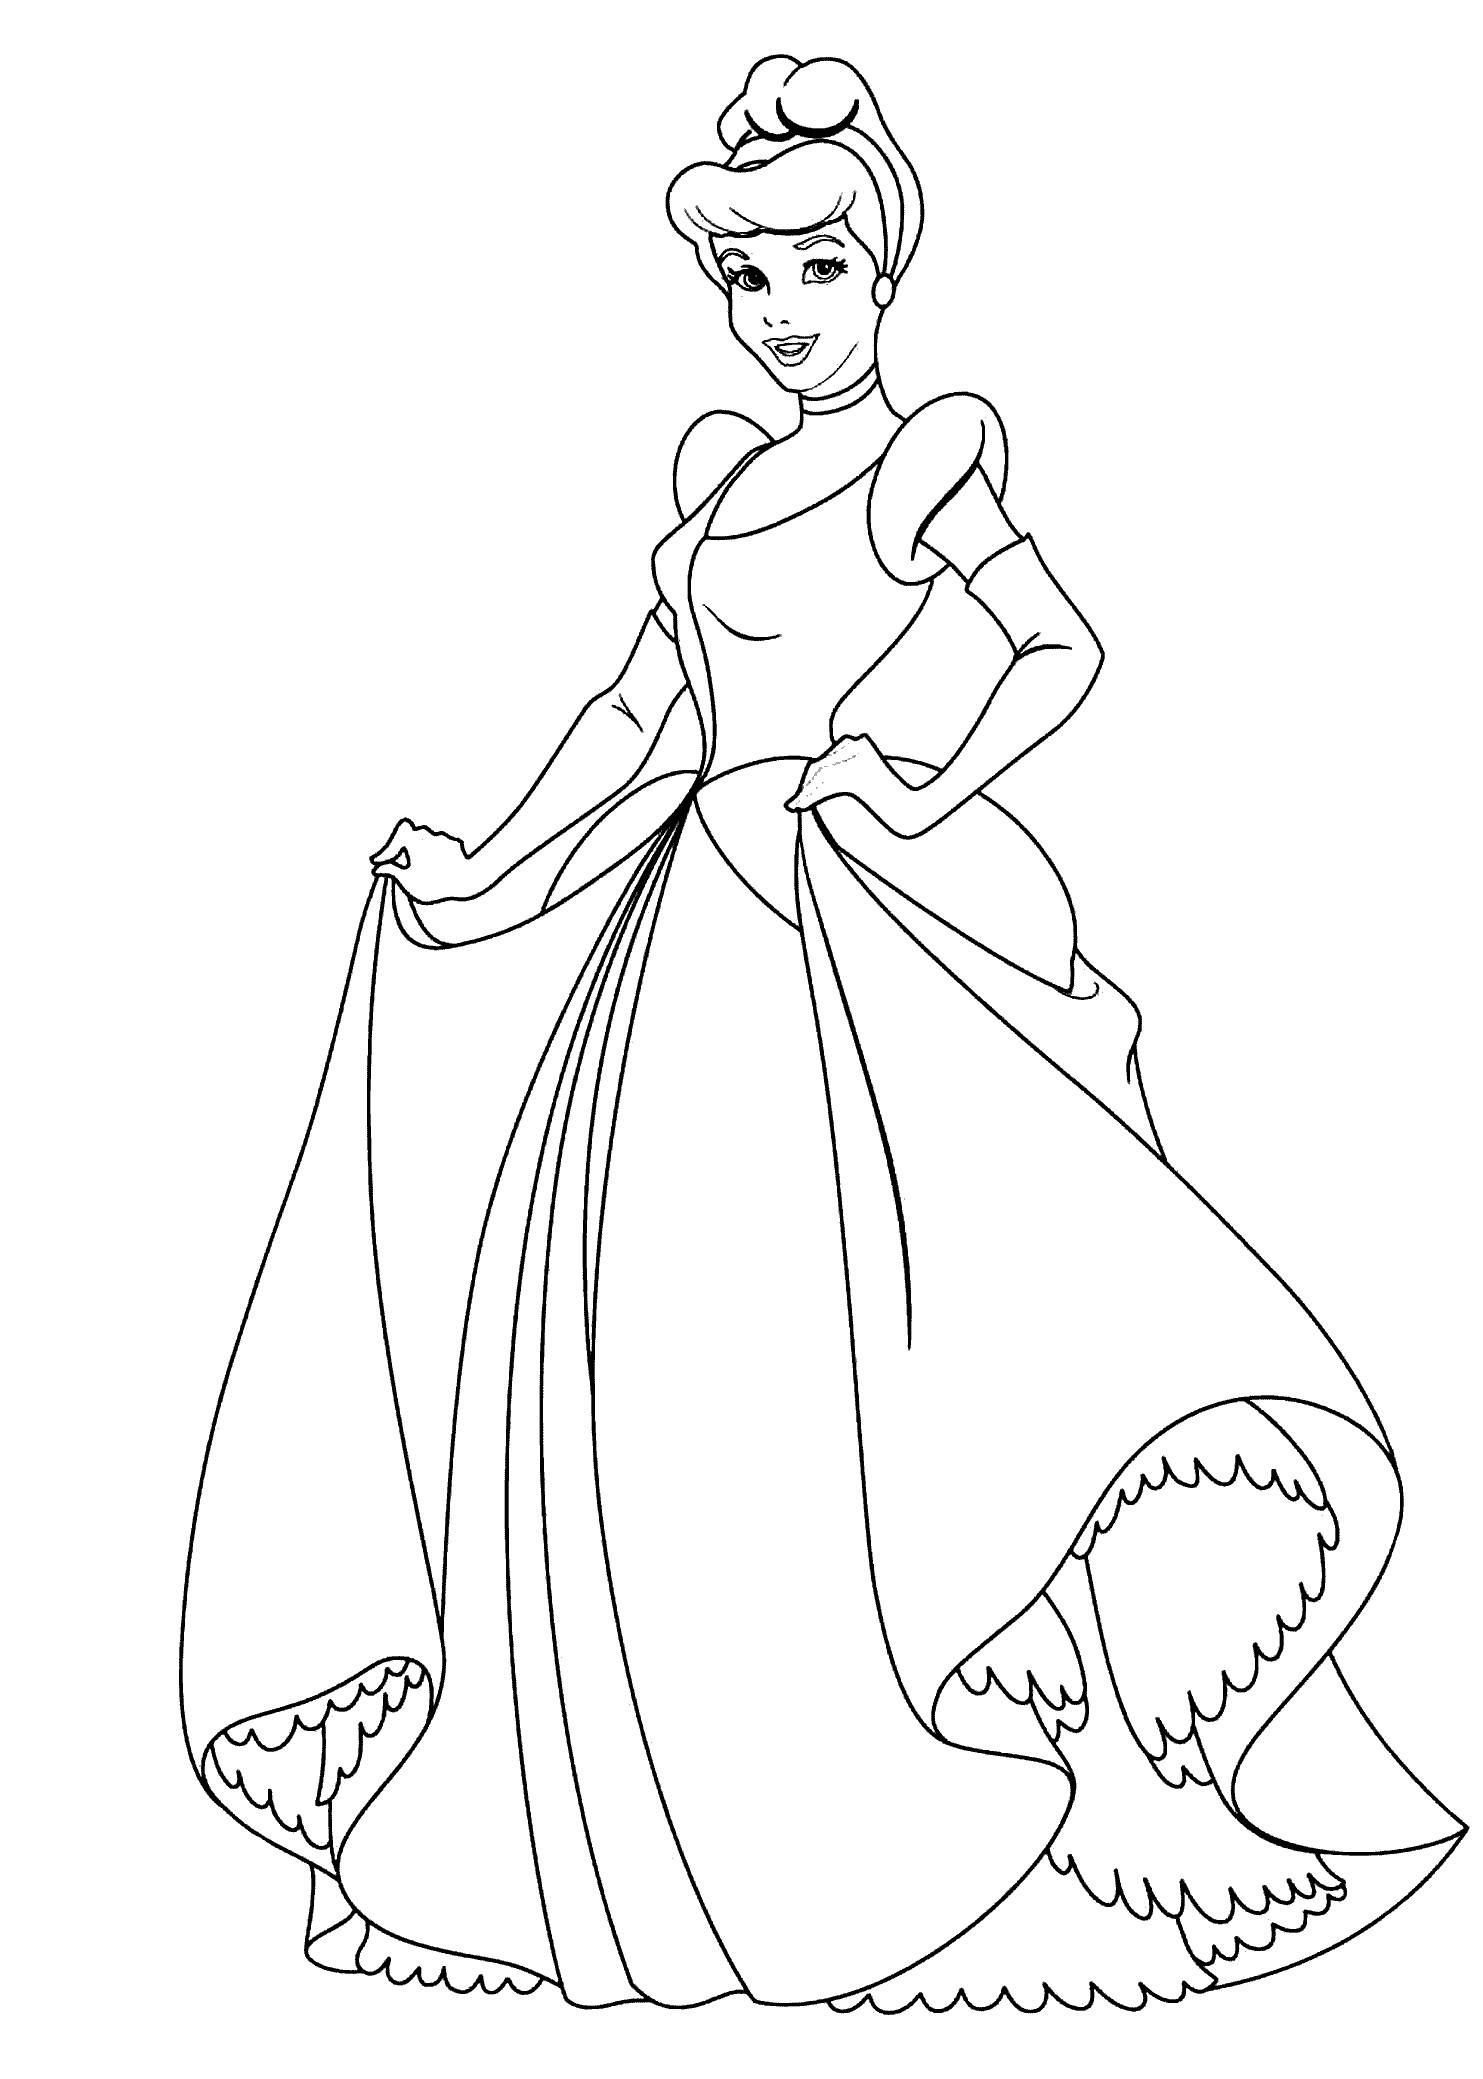 The 21 Best Ideas for Princess Coloring Pages for Kids – Home, Family ...